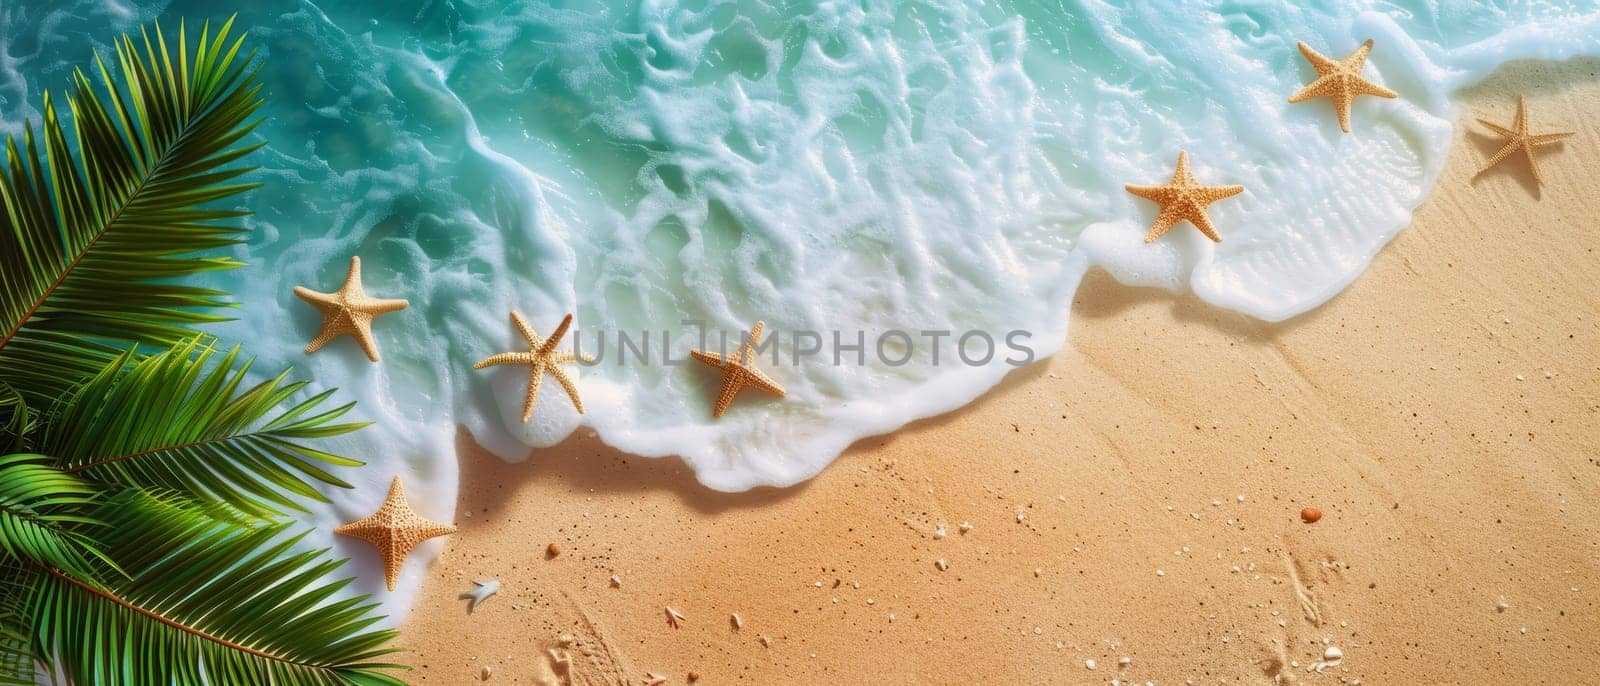 Pristine beach with turquoise waters, foamy waves, and starfish adorning the shore beneath palm fronds. Copy space for advertising, presentation product or text